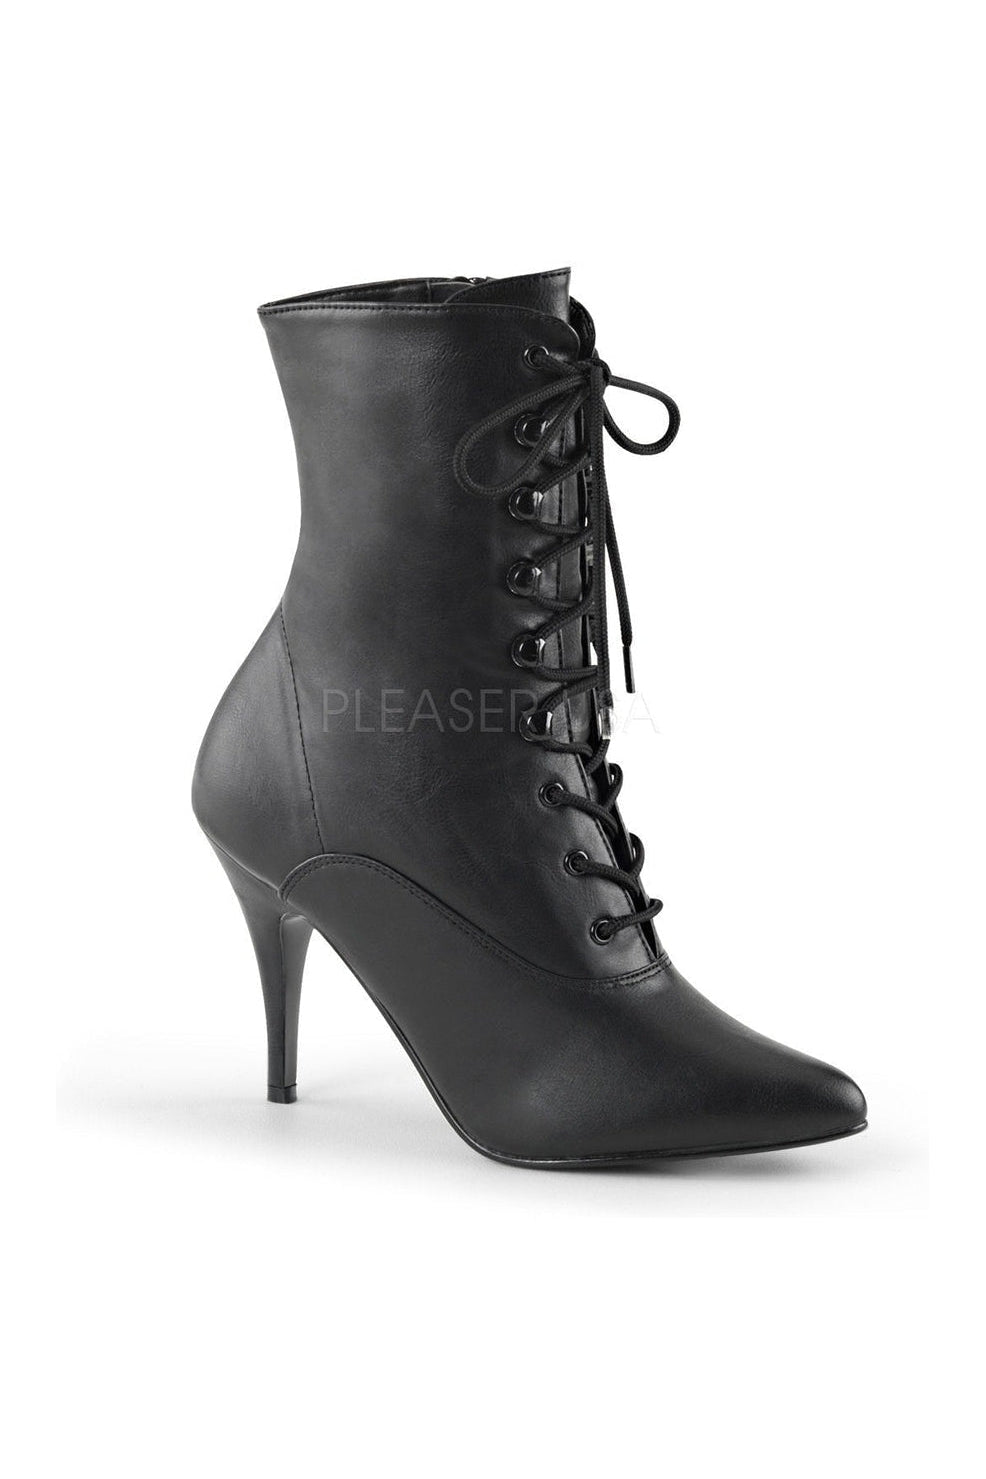 VANITY-1020 Ankle Boot | Black Faux Leather-Pleaser-Black-Ankle Boots-SEXYSHOES.COM